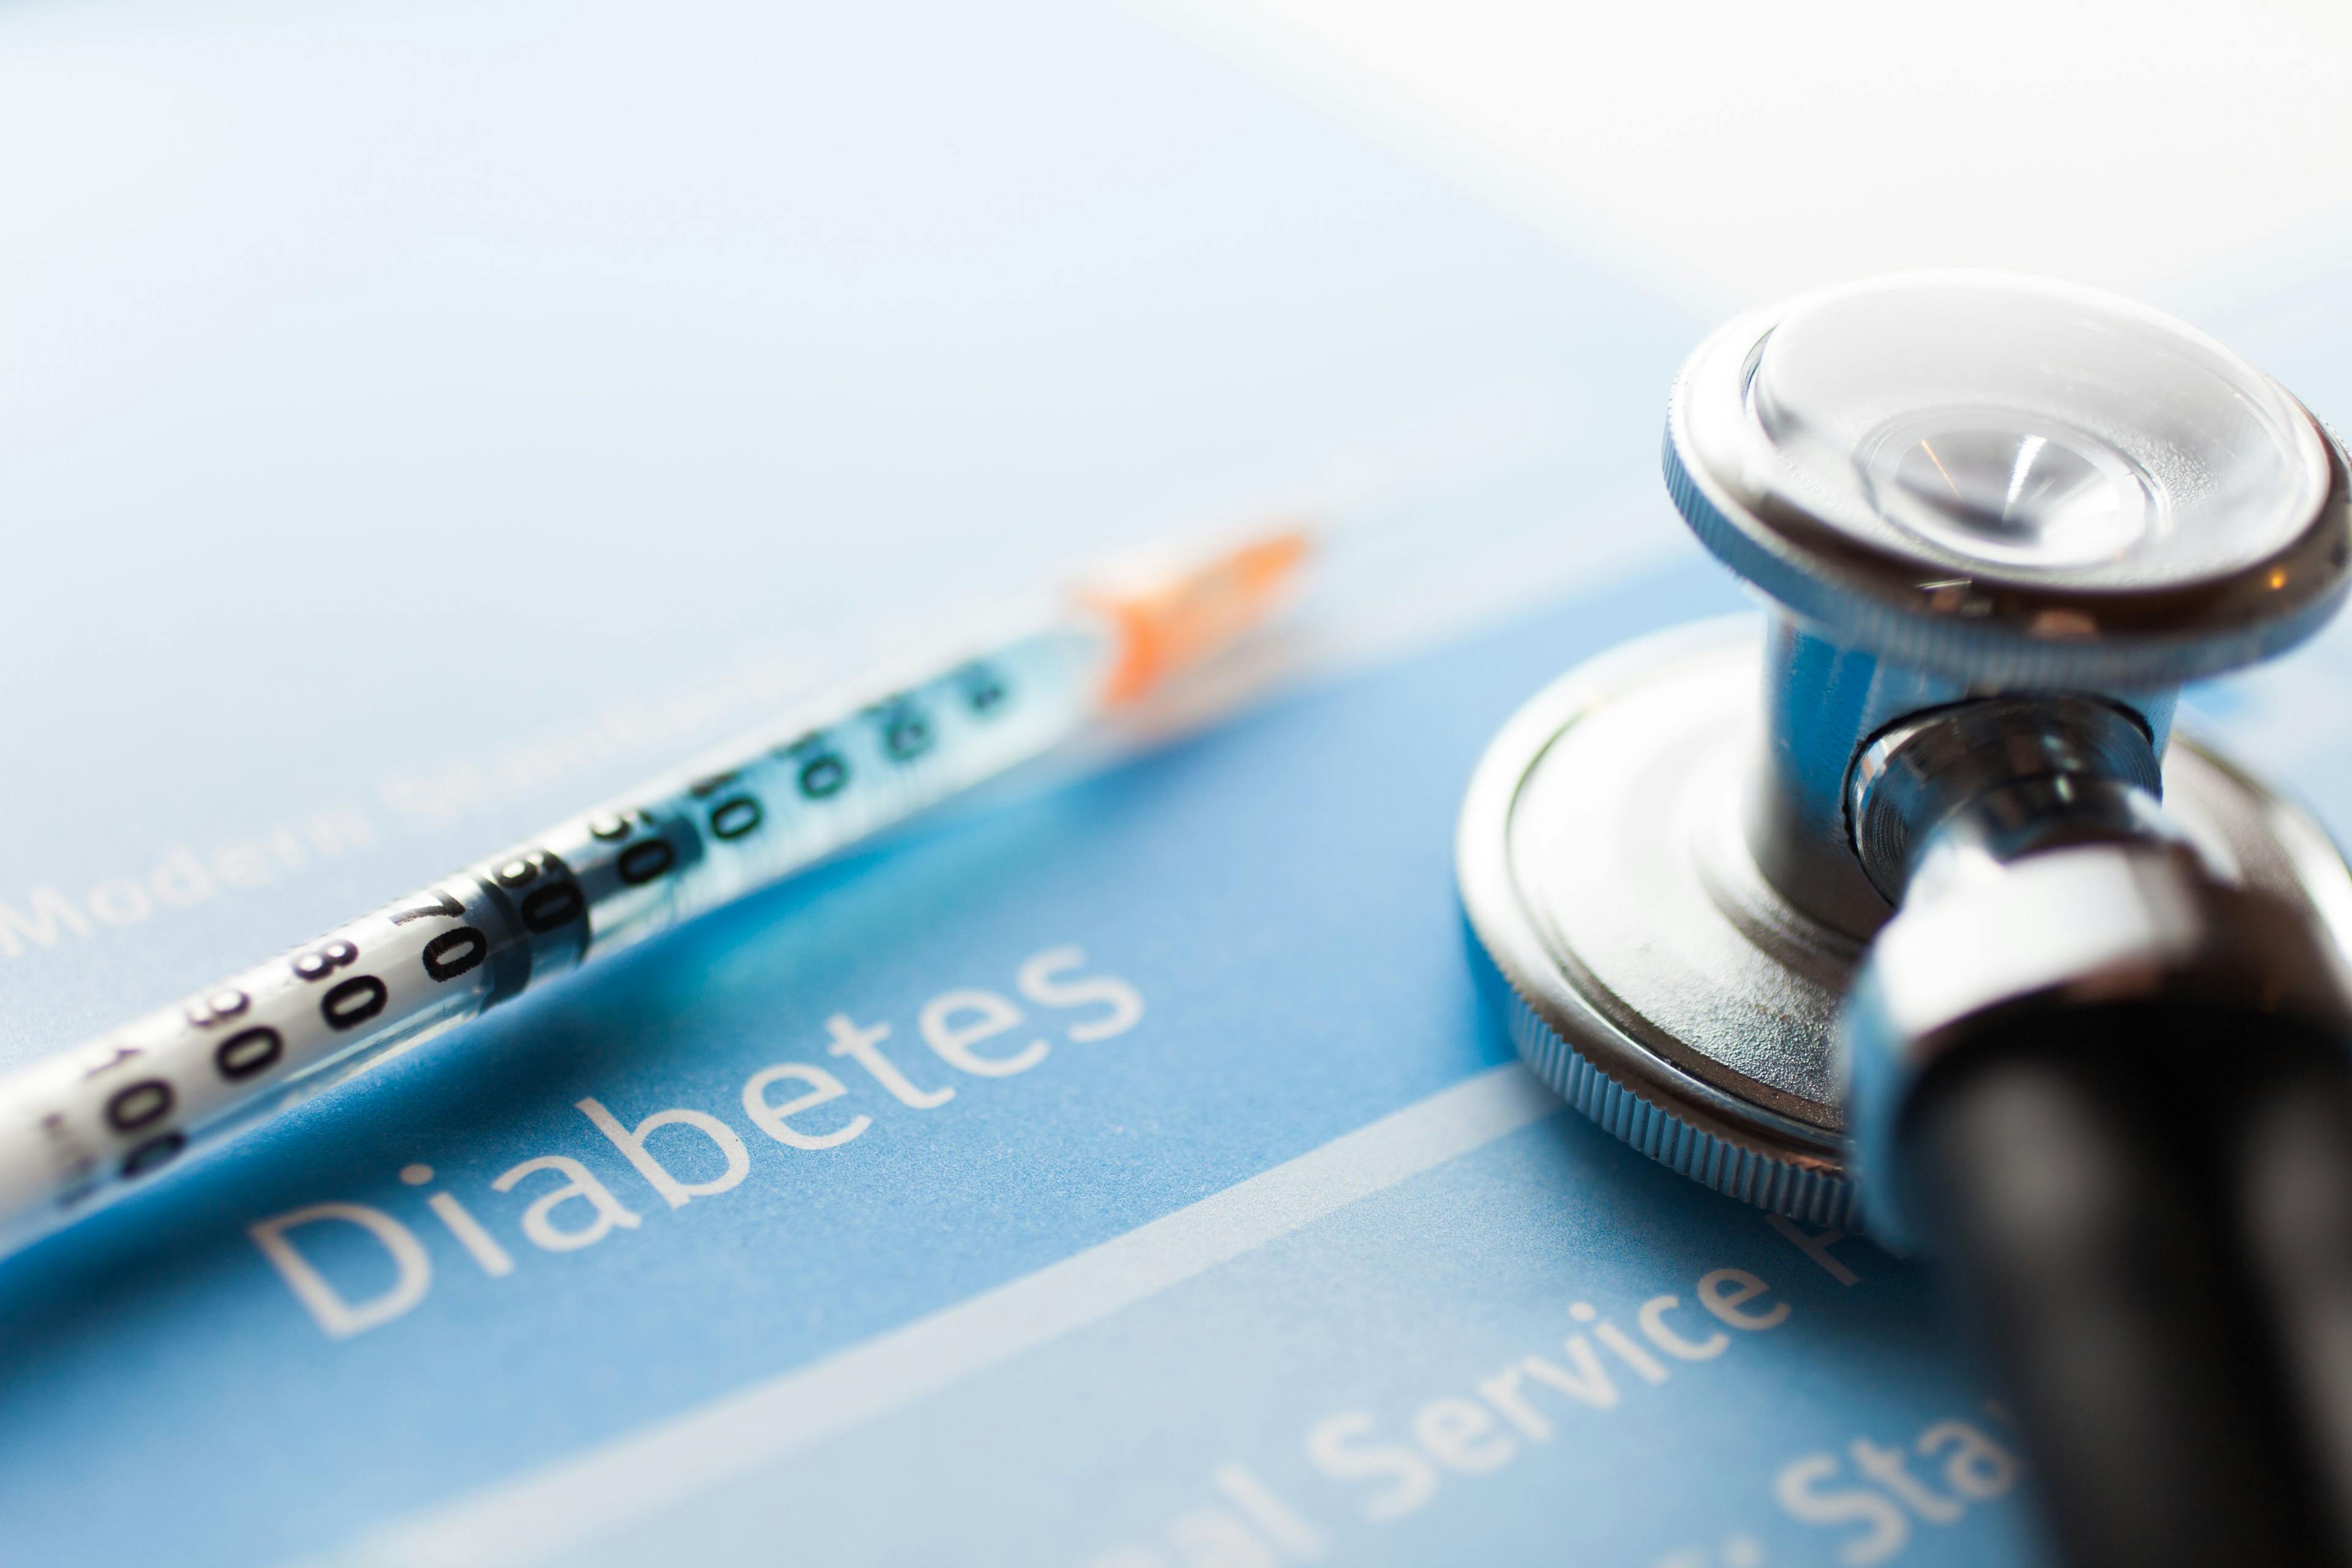 How the Phase 3 Trial Assessing an Investigational Dose of Semaglutide Injection for Type 2 Diabetes Was Conducted